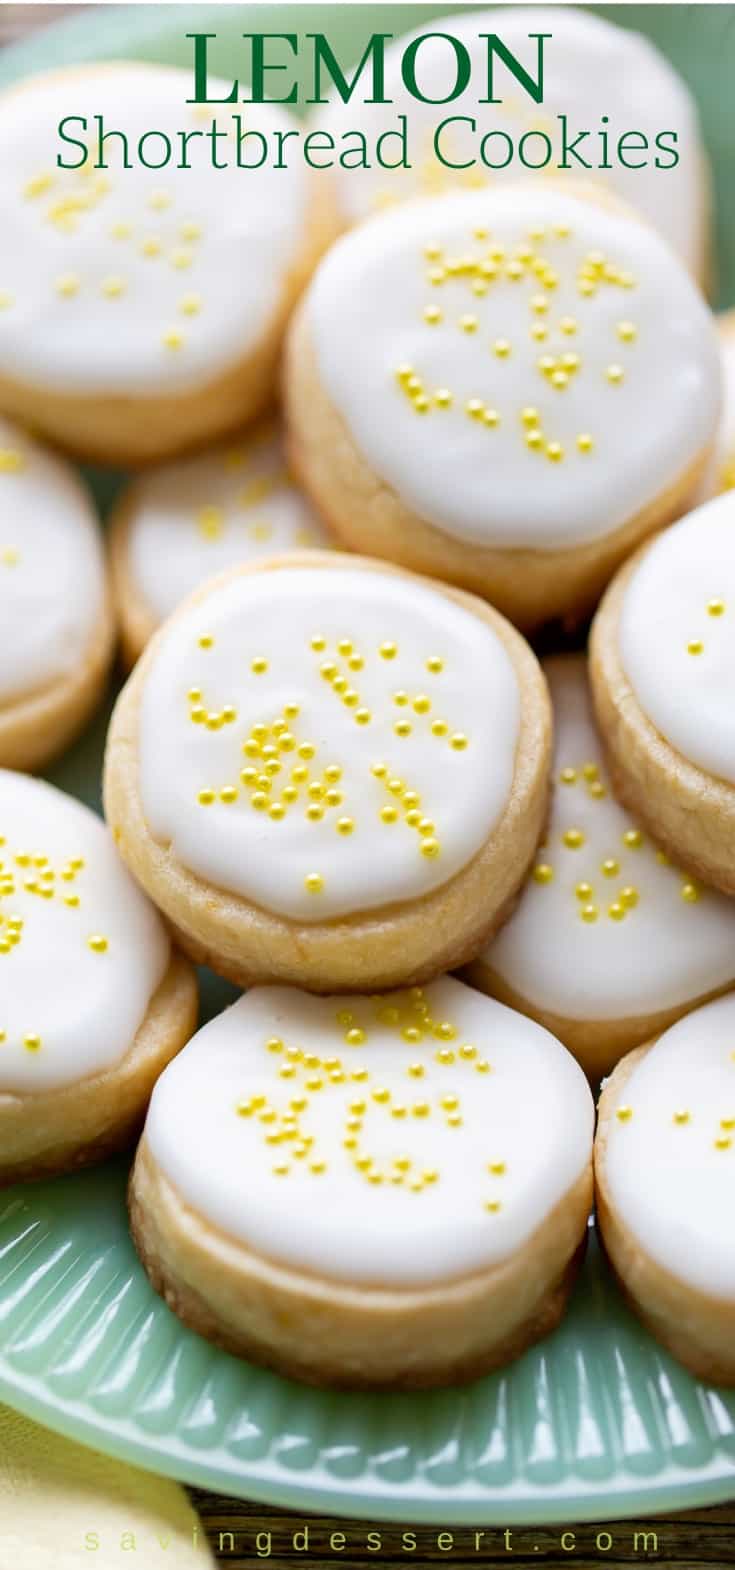 Lemon Shortbread Cookies with lemon icing and yellow sprinkles